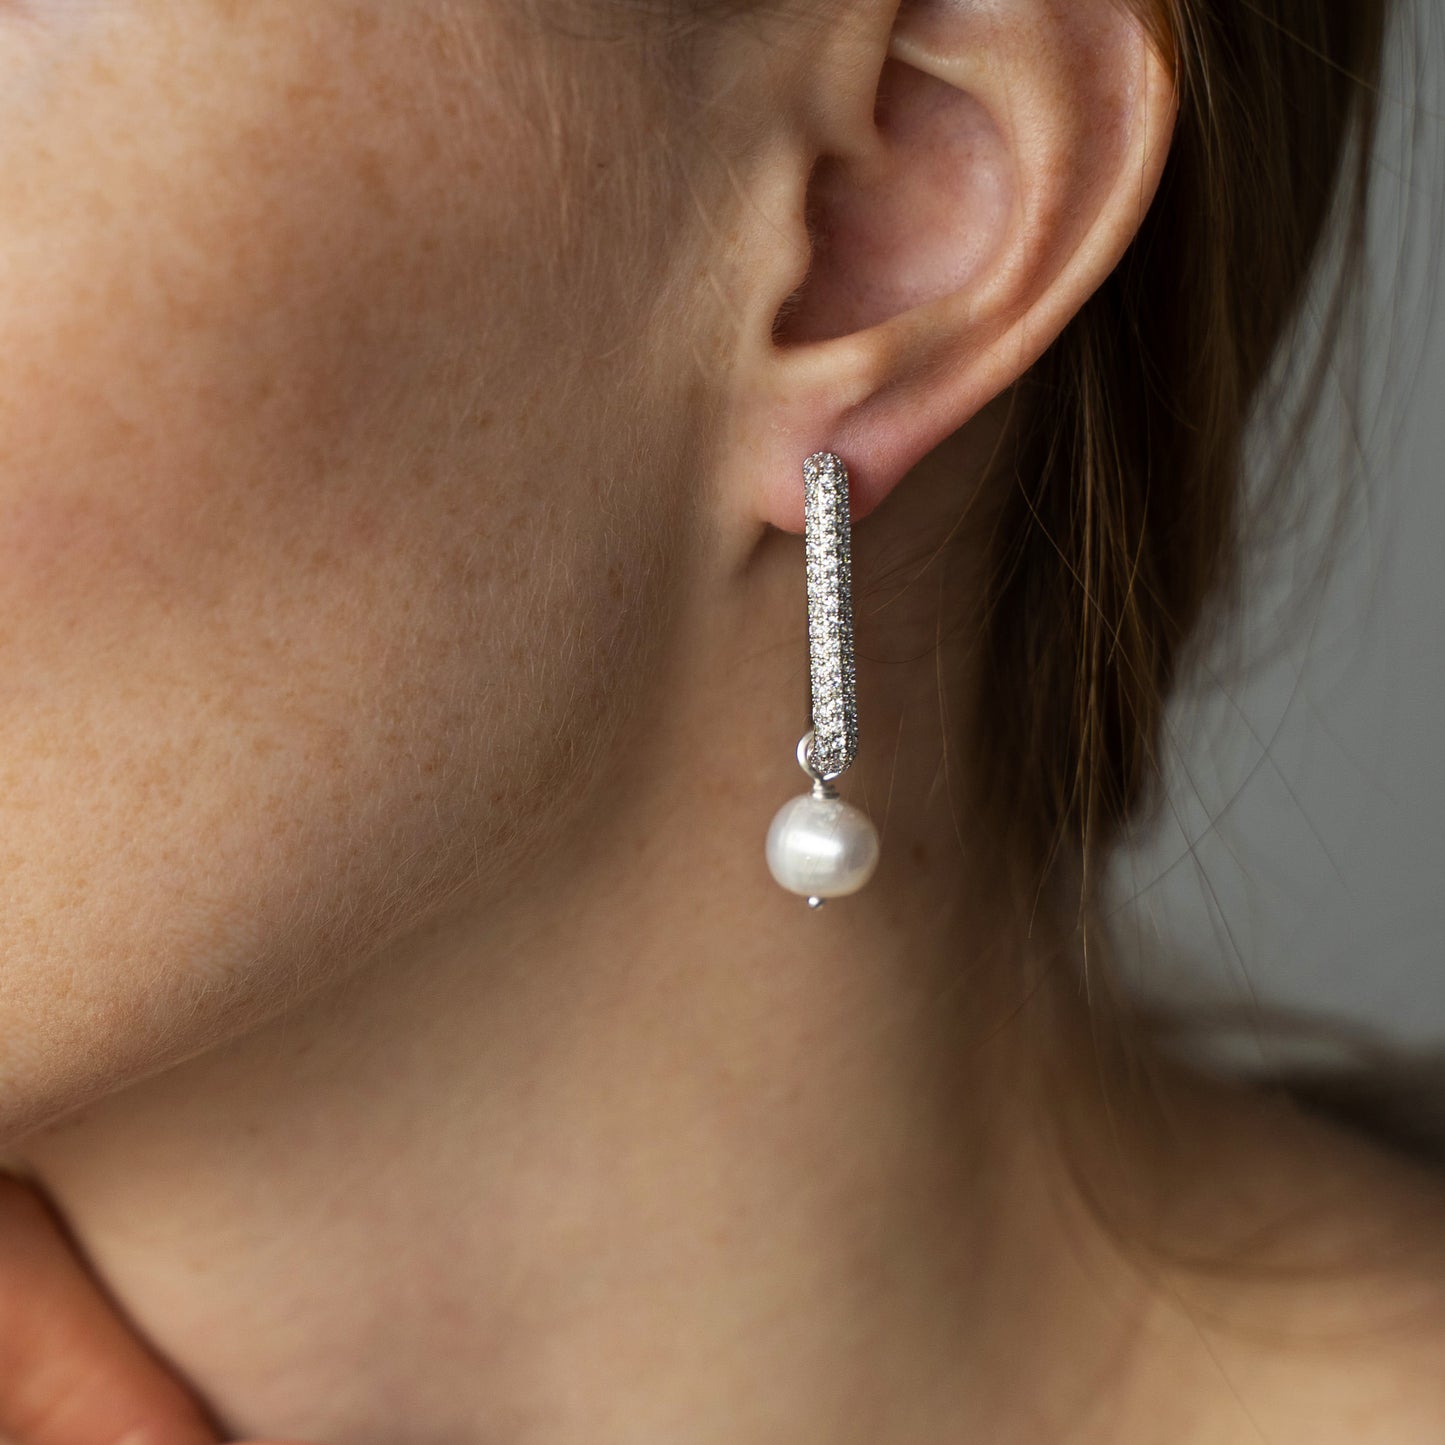 Silver plated earrings with natural pearls (2 in 1)